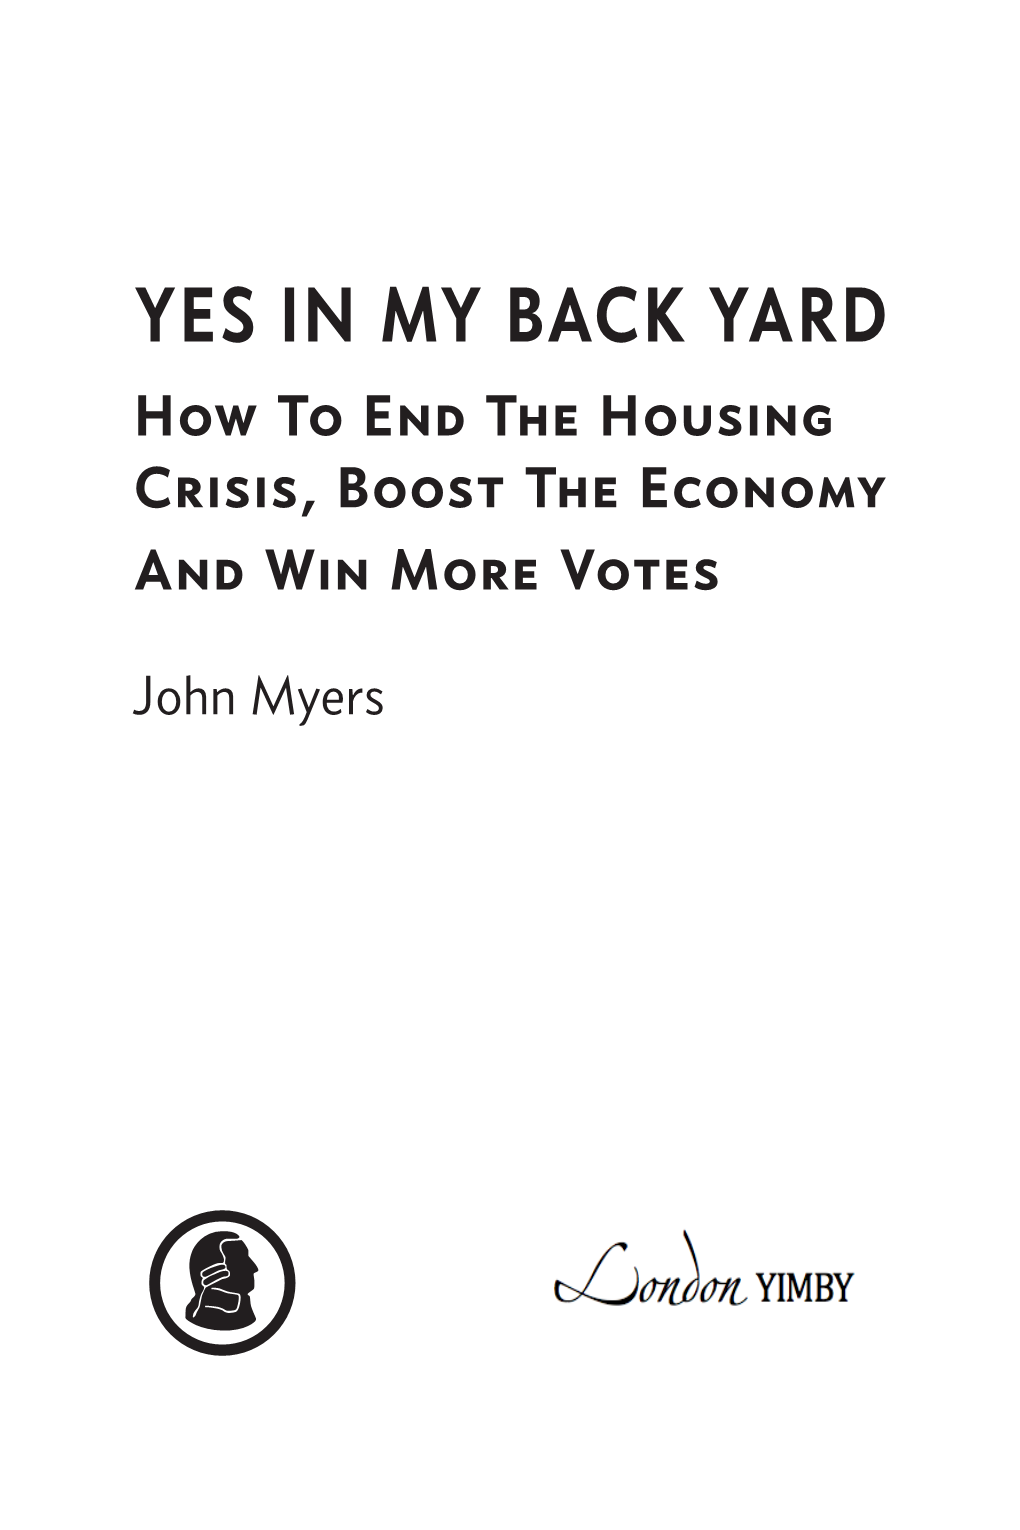 YES in MY BACK YARD How to End the Housing Crisis, Boost the Economy and Win More Votes